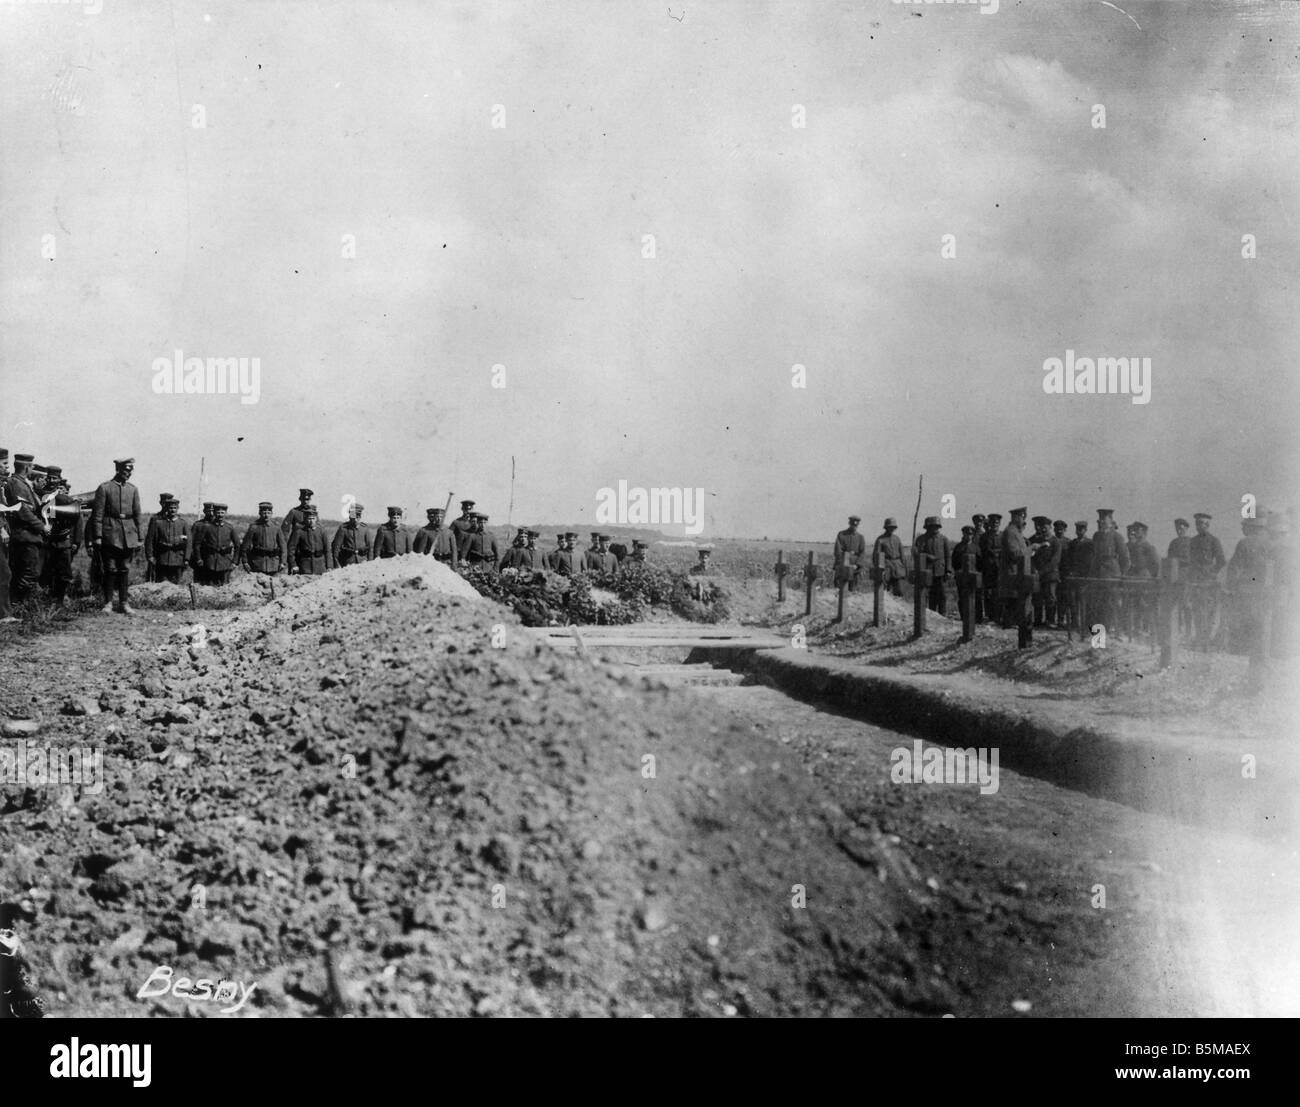 2 G55 W1 1918 17 Funeral for German pilot WWI 1918 History World War I Western Front Funeral for a German pilot at the war cemet Stock Photo